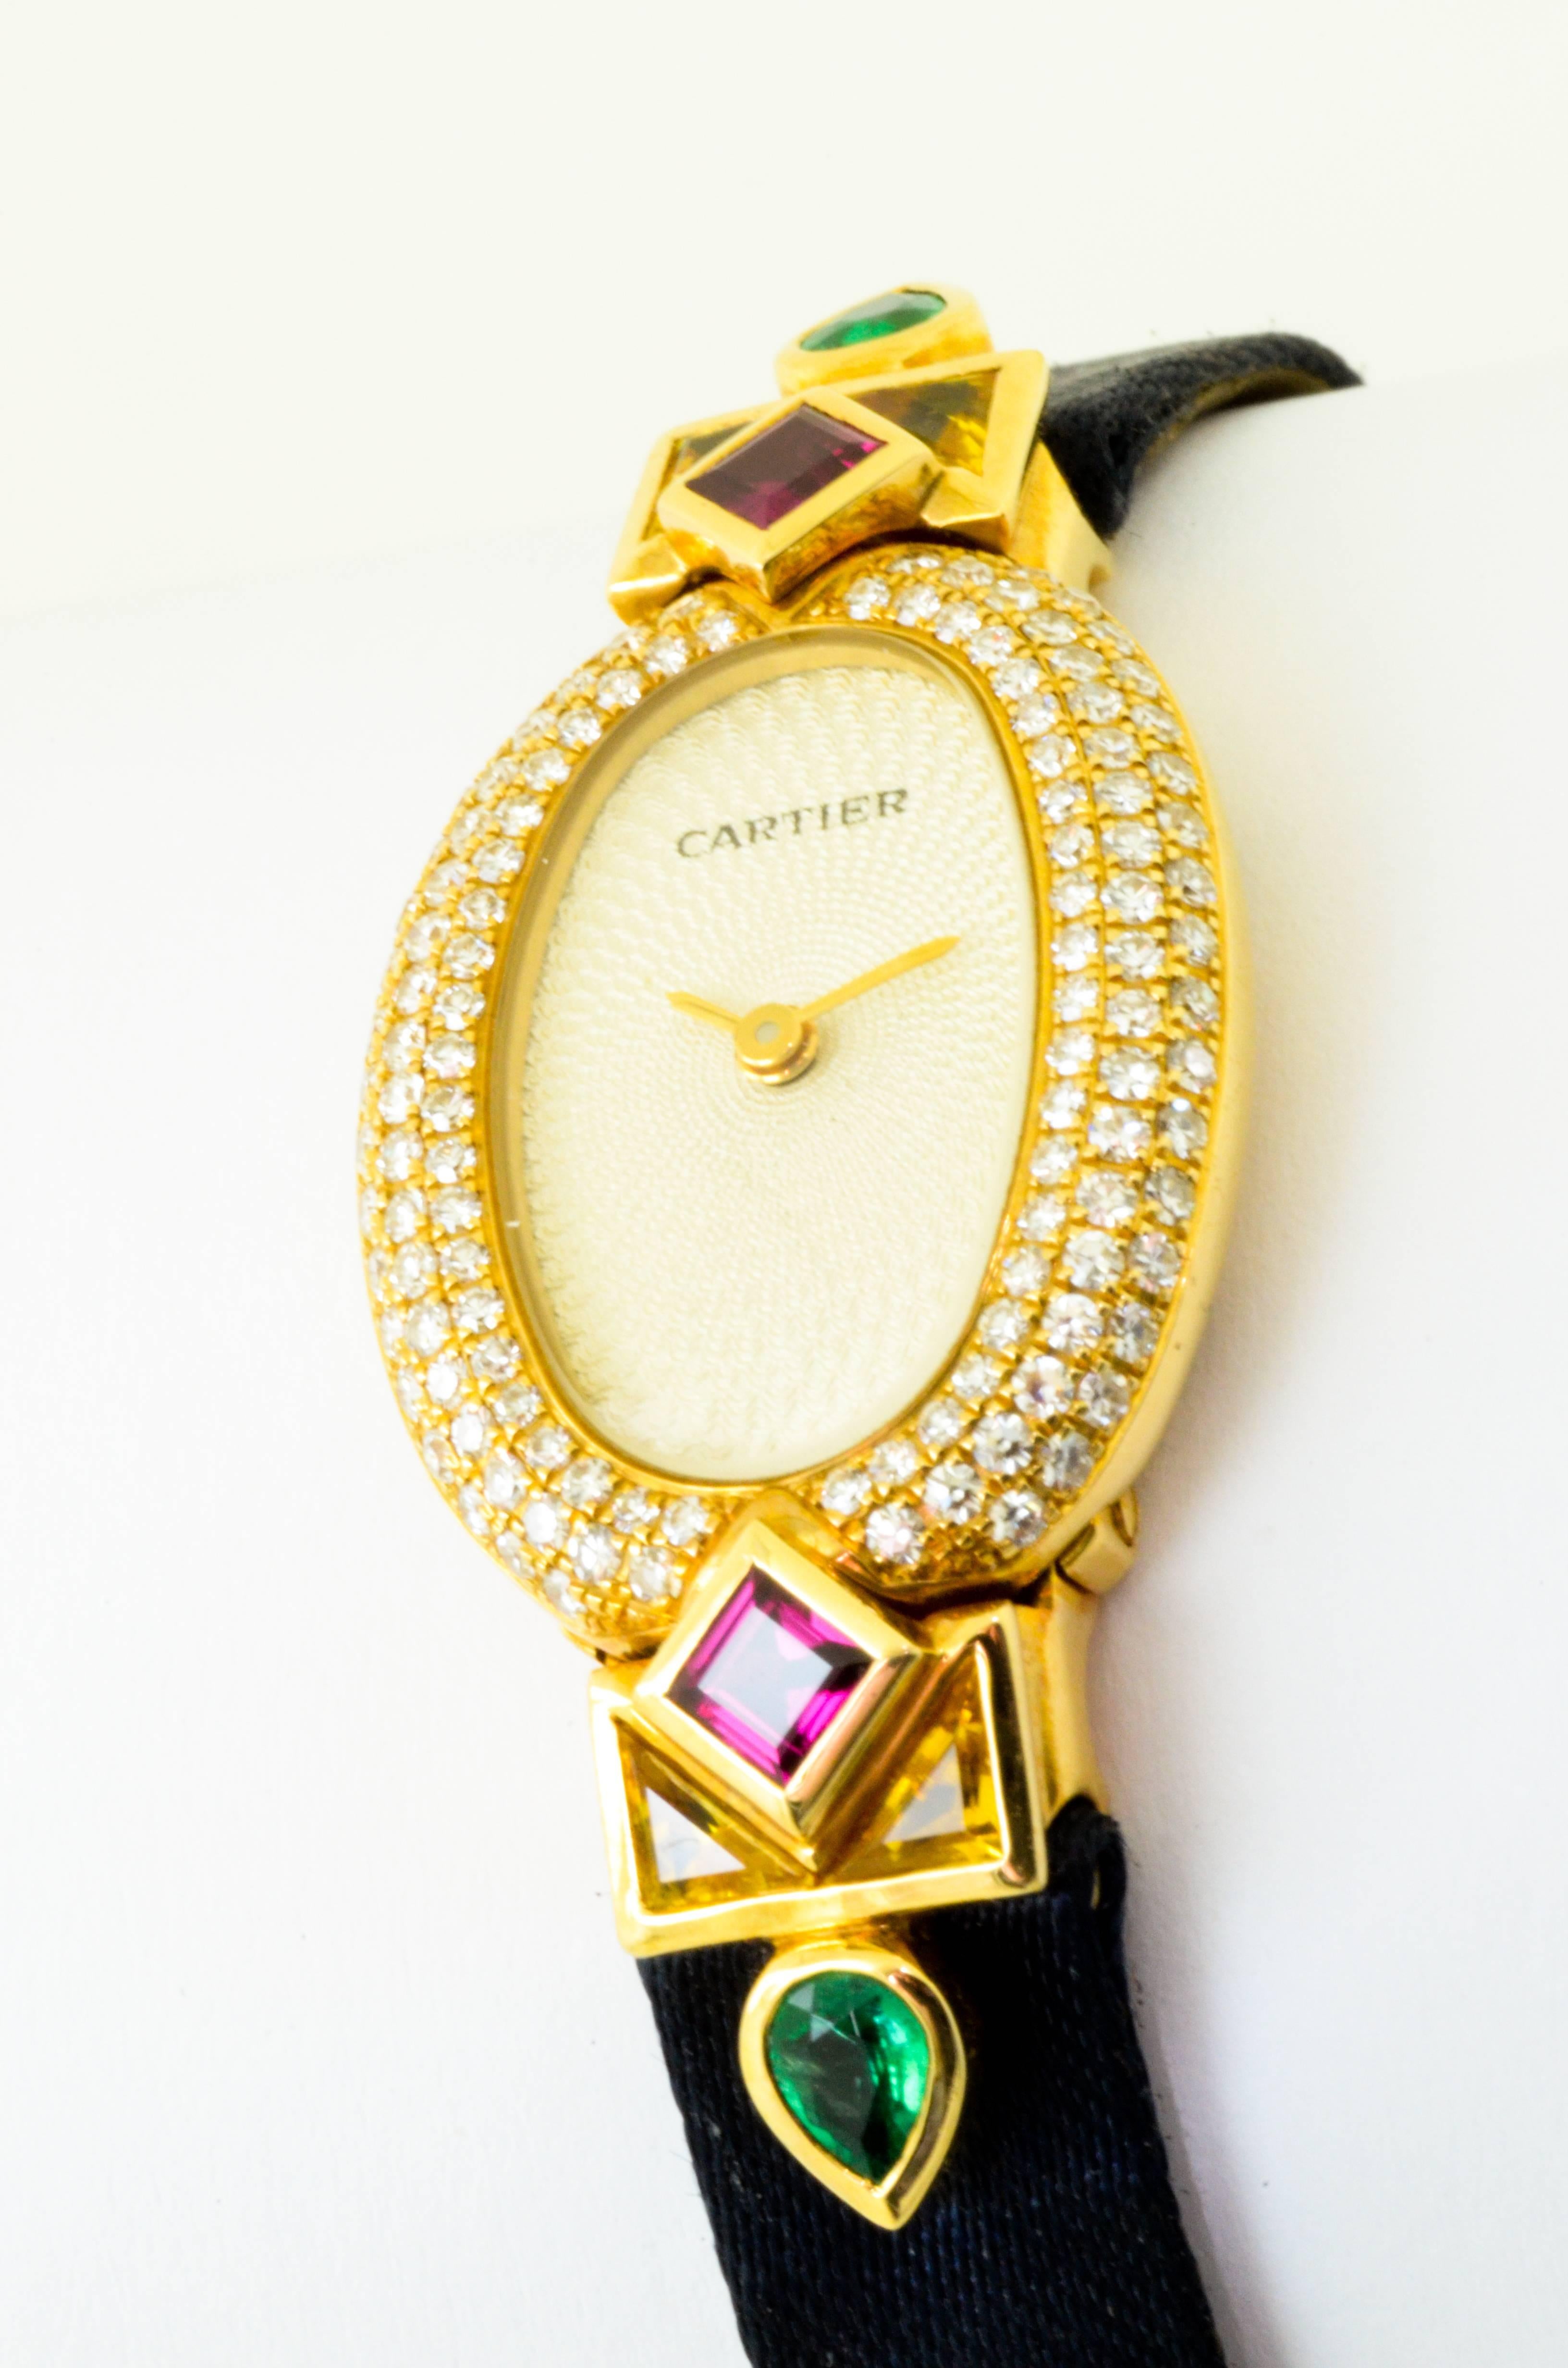 A stunning vintage Cartier 1960 ladies wrist watch set in 18 karat yellow gold with original set diamond, emerald, ruby and sapphire detailing.

Bracelet is both silk and leather with original 'Cartier Paris'.

